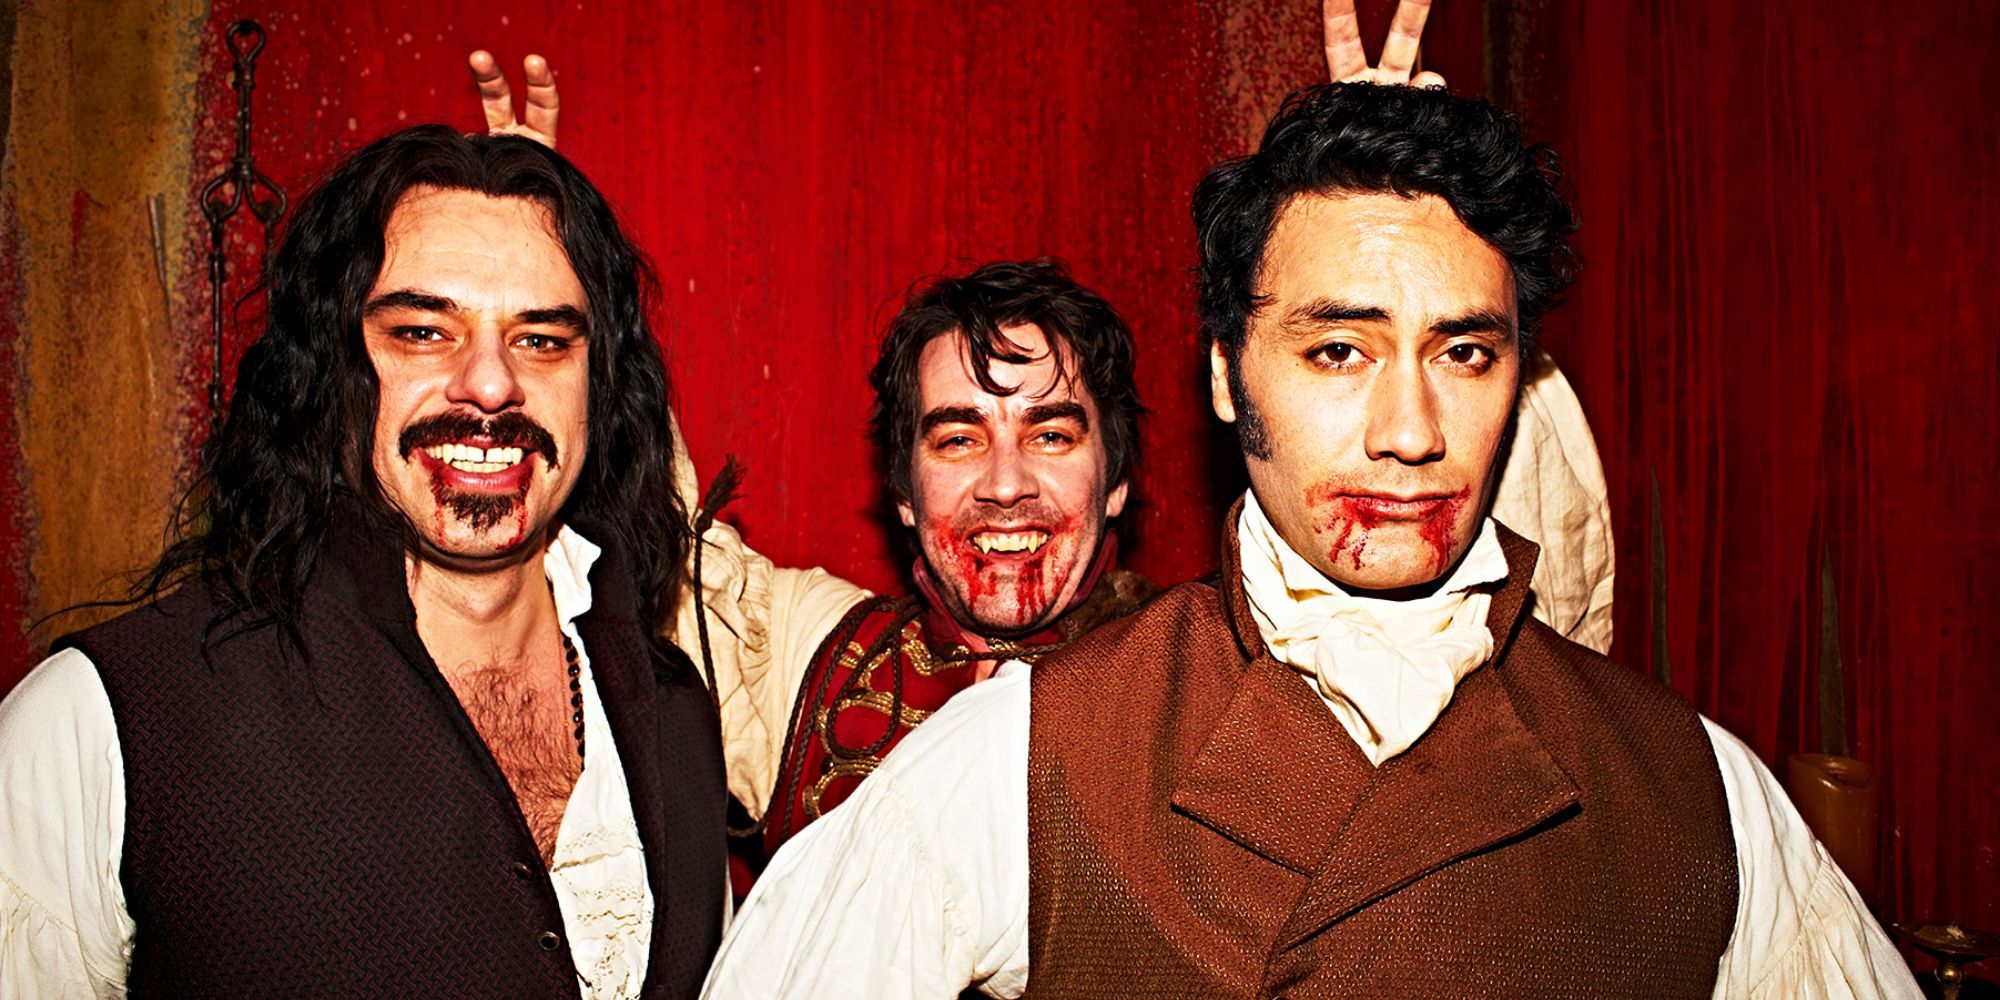 Jemaine Clement as Vladislav, Jonathan Brugh as Deacon and Taika Waititi as Viago, a group of vampires with blood in their mouths posing in What We Do in the Shadows